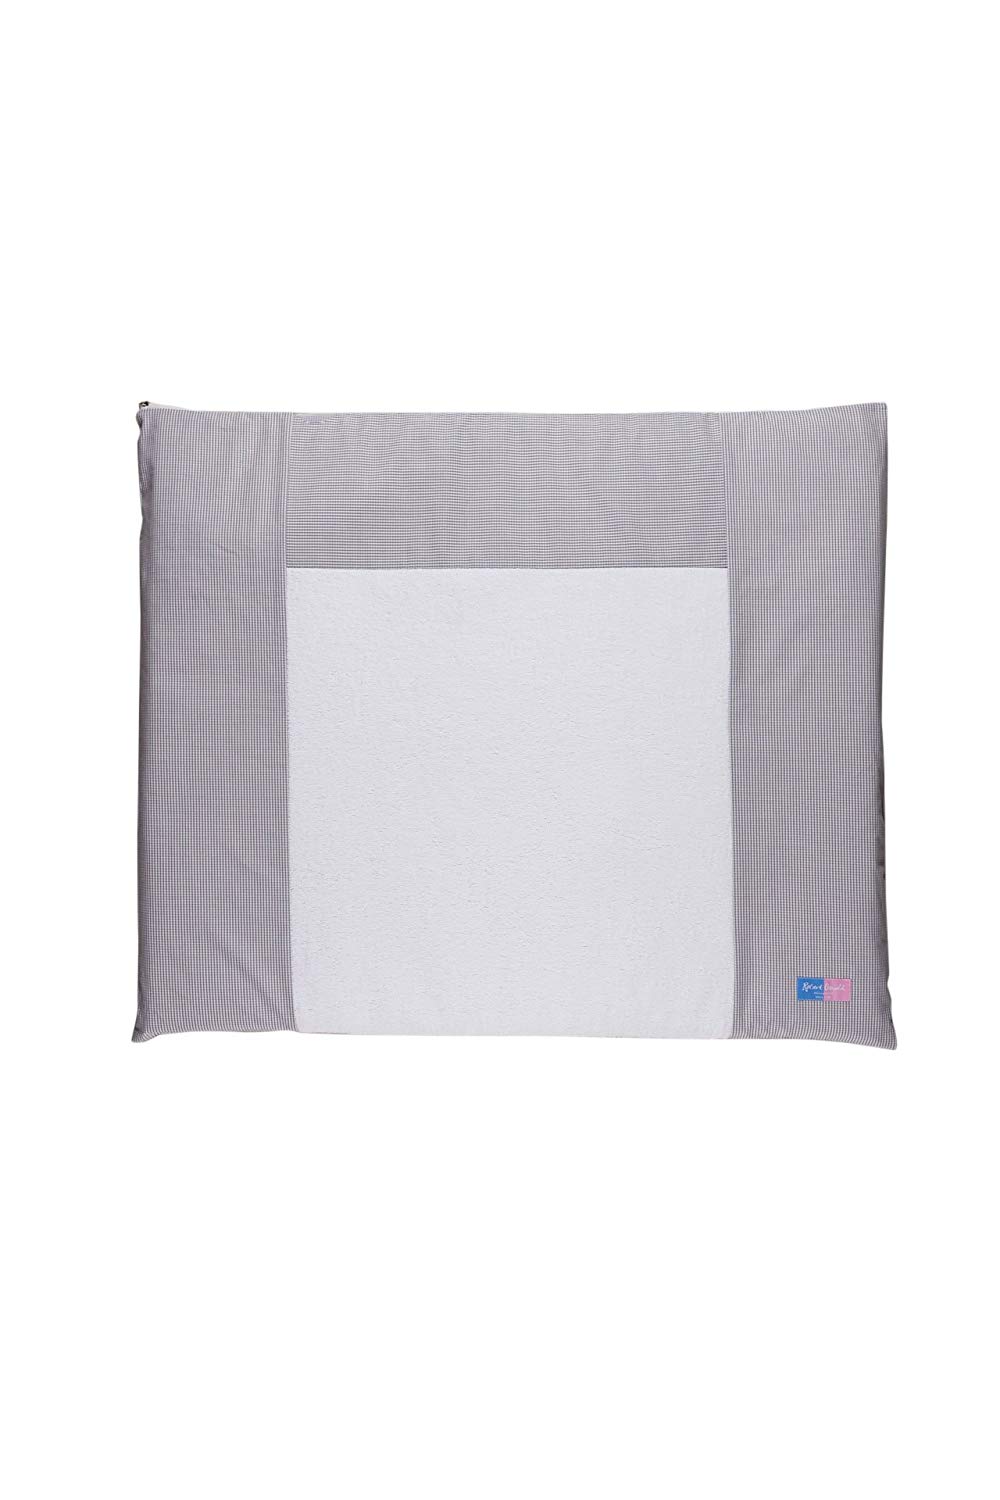 Robert Osswald 1.4.1.1.1.1-K05-01 Changing Mat with Terry Cloth Cover and Inlet 70 cm x 84 cm